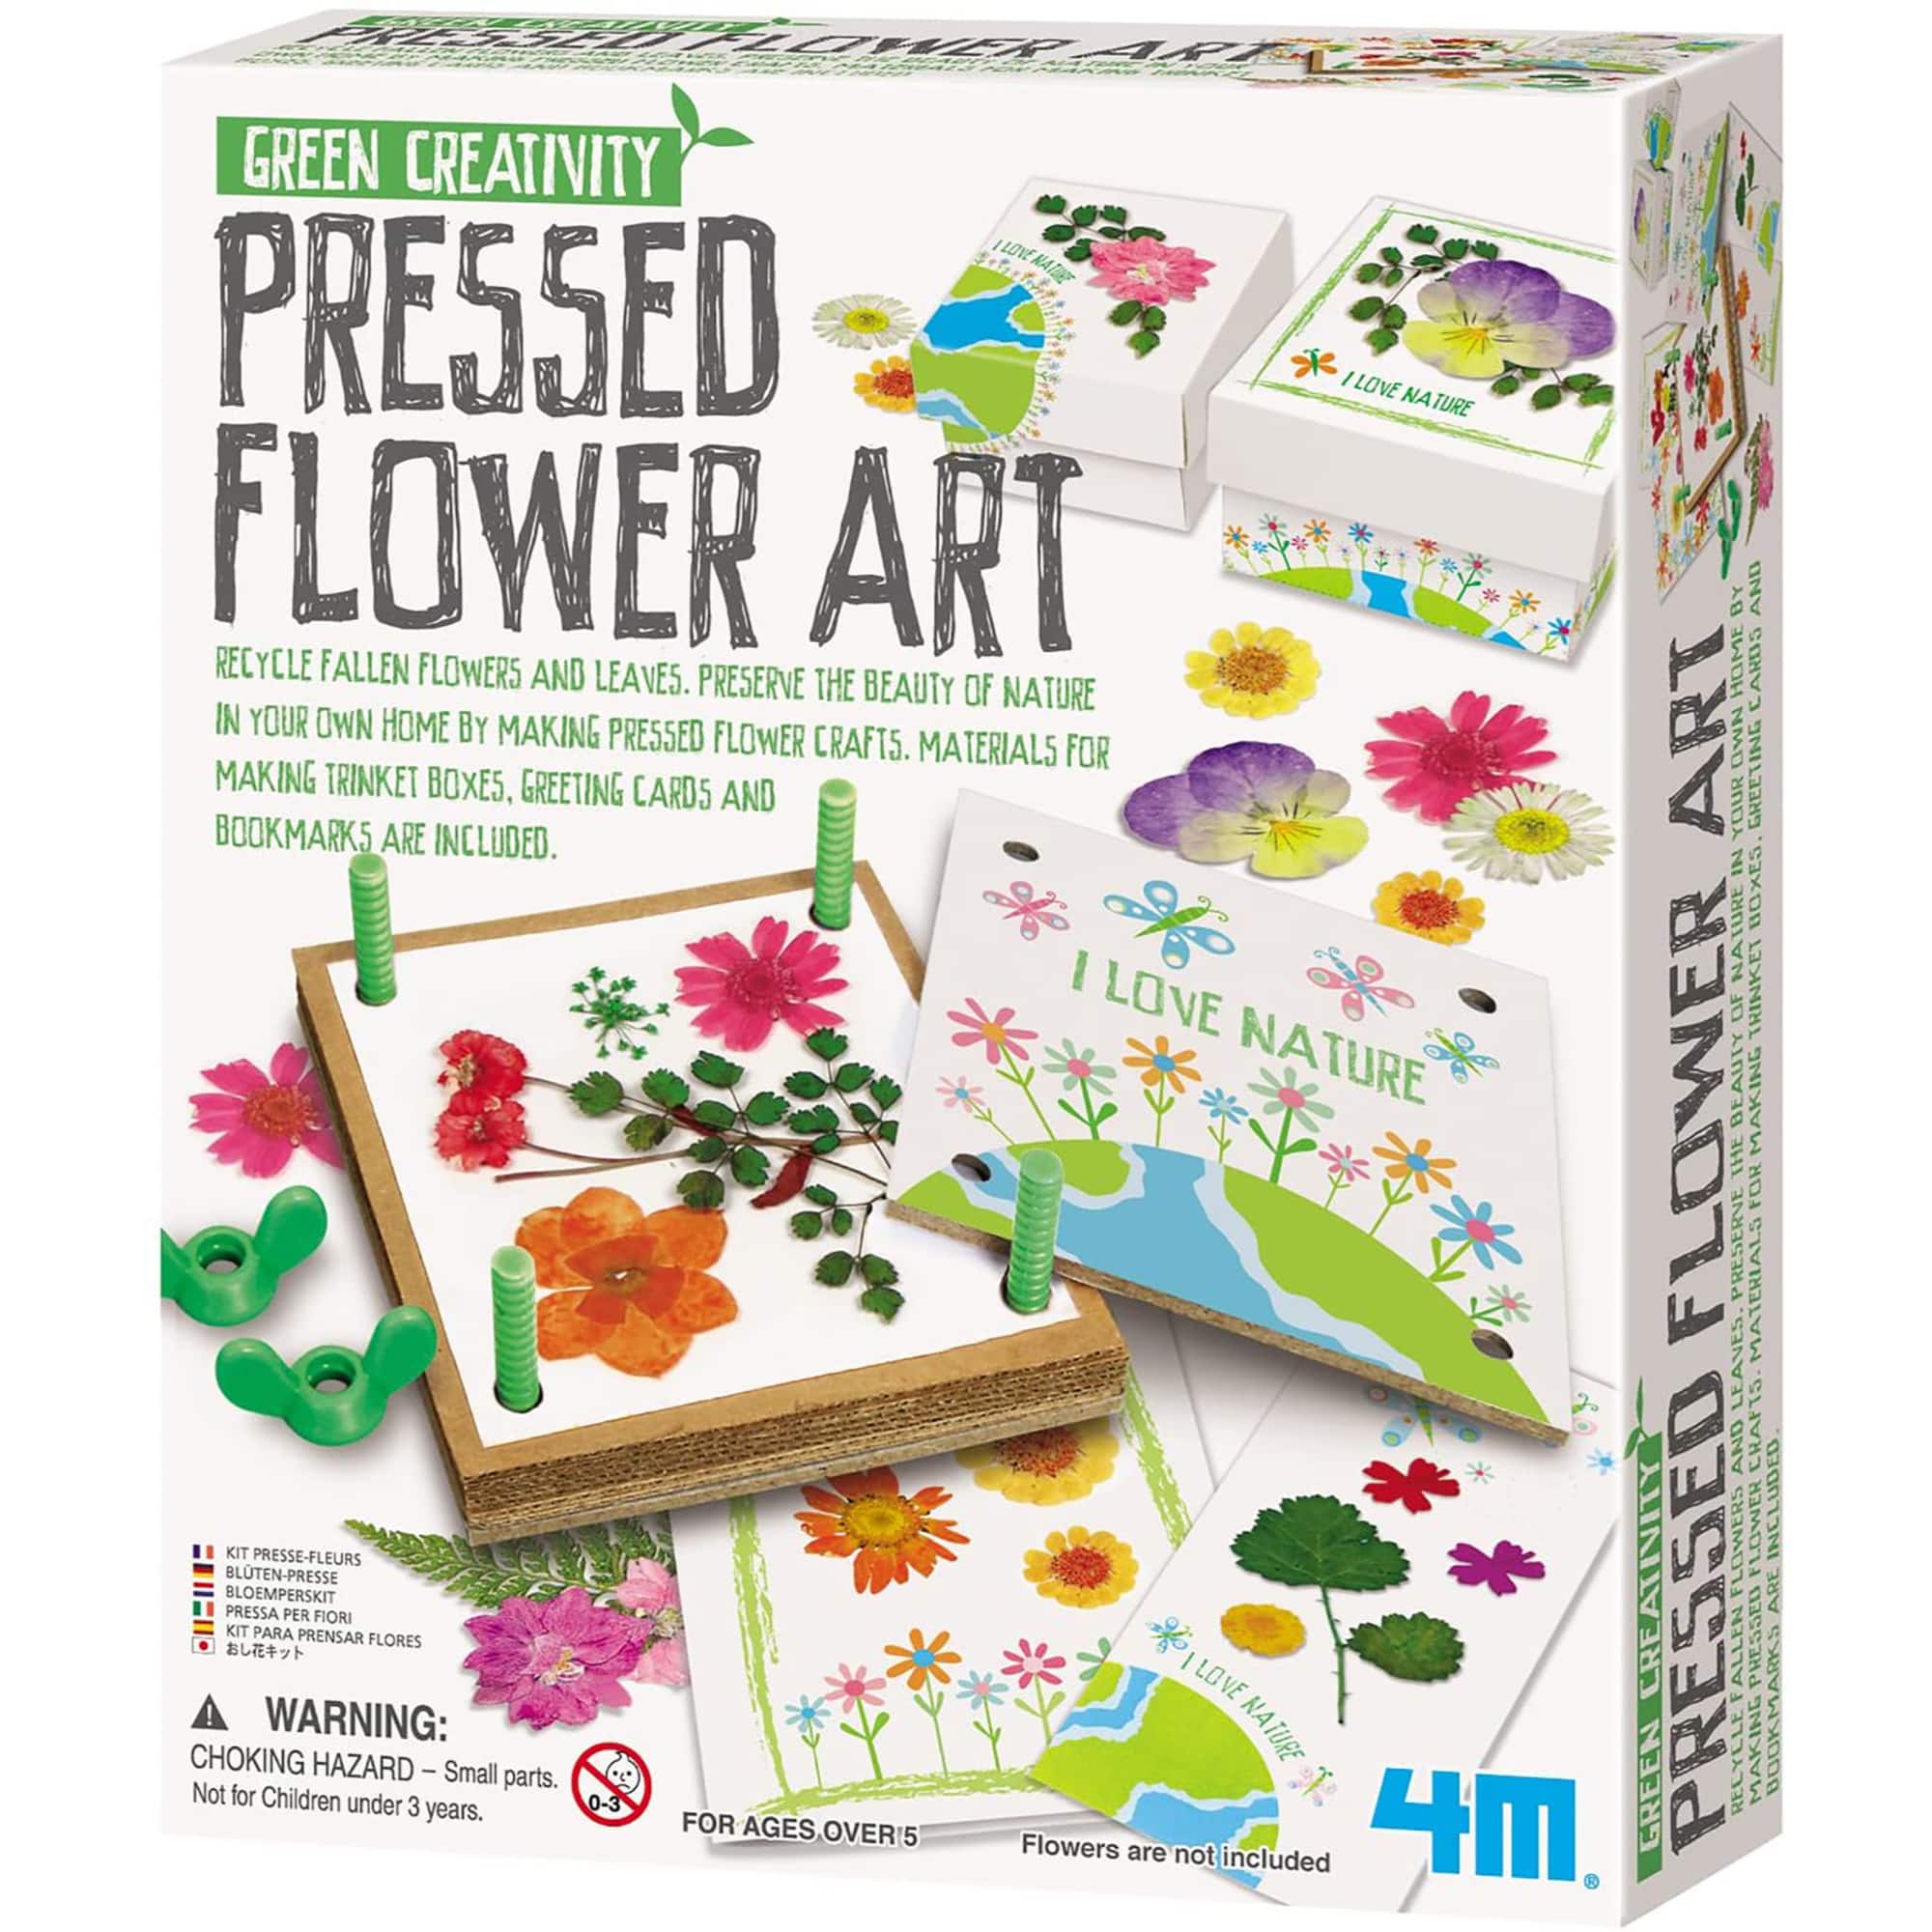 Flower and Leaf Press - A Child's Dream